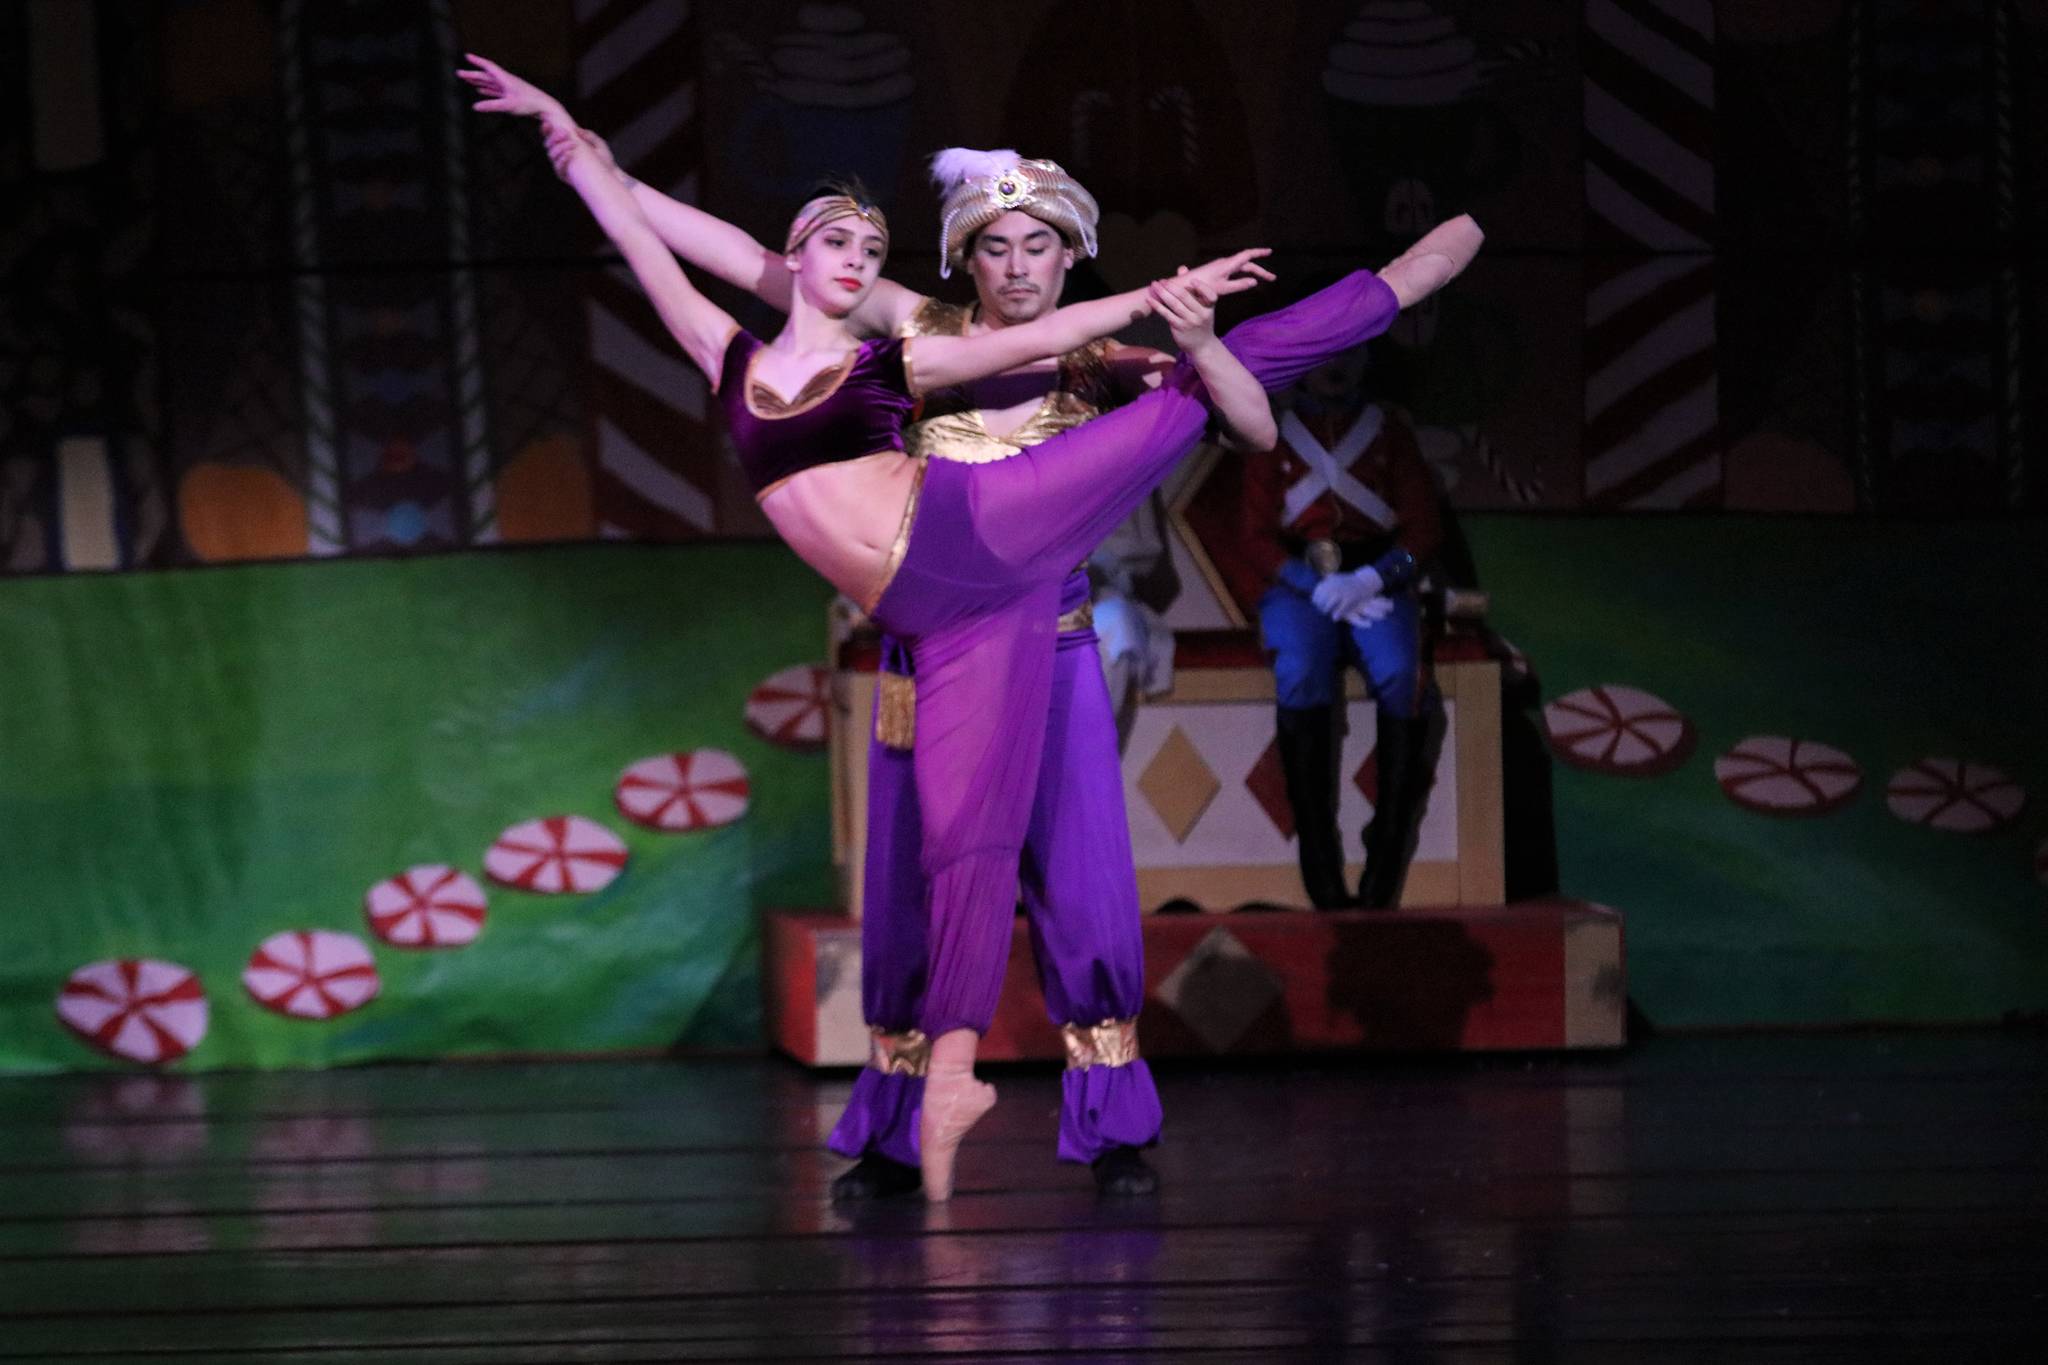 Lauryn Campos and Ty Yamaoka dance “Coffee” during Act 2 of “The Nutcracker” during a December 2019 performance. (Courtesy Photo / Juneau Dance Theatre)